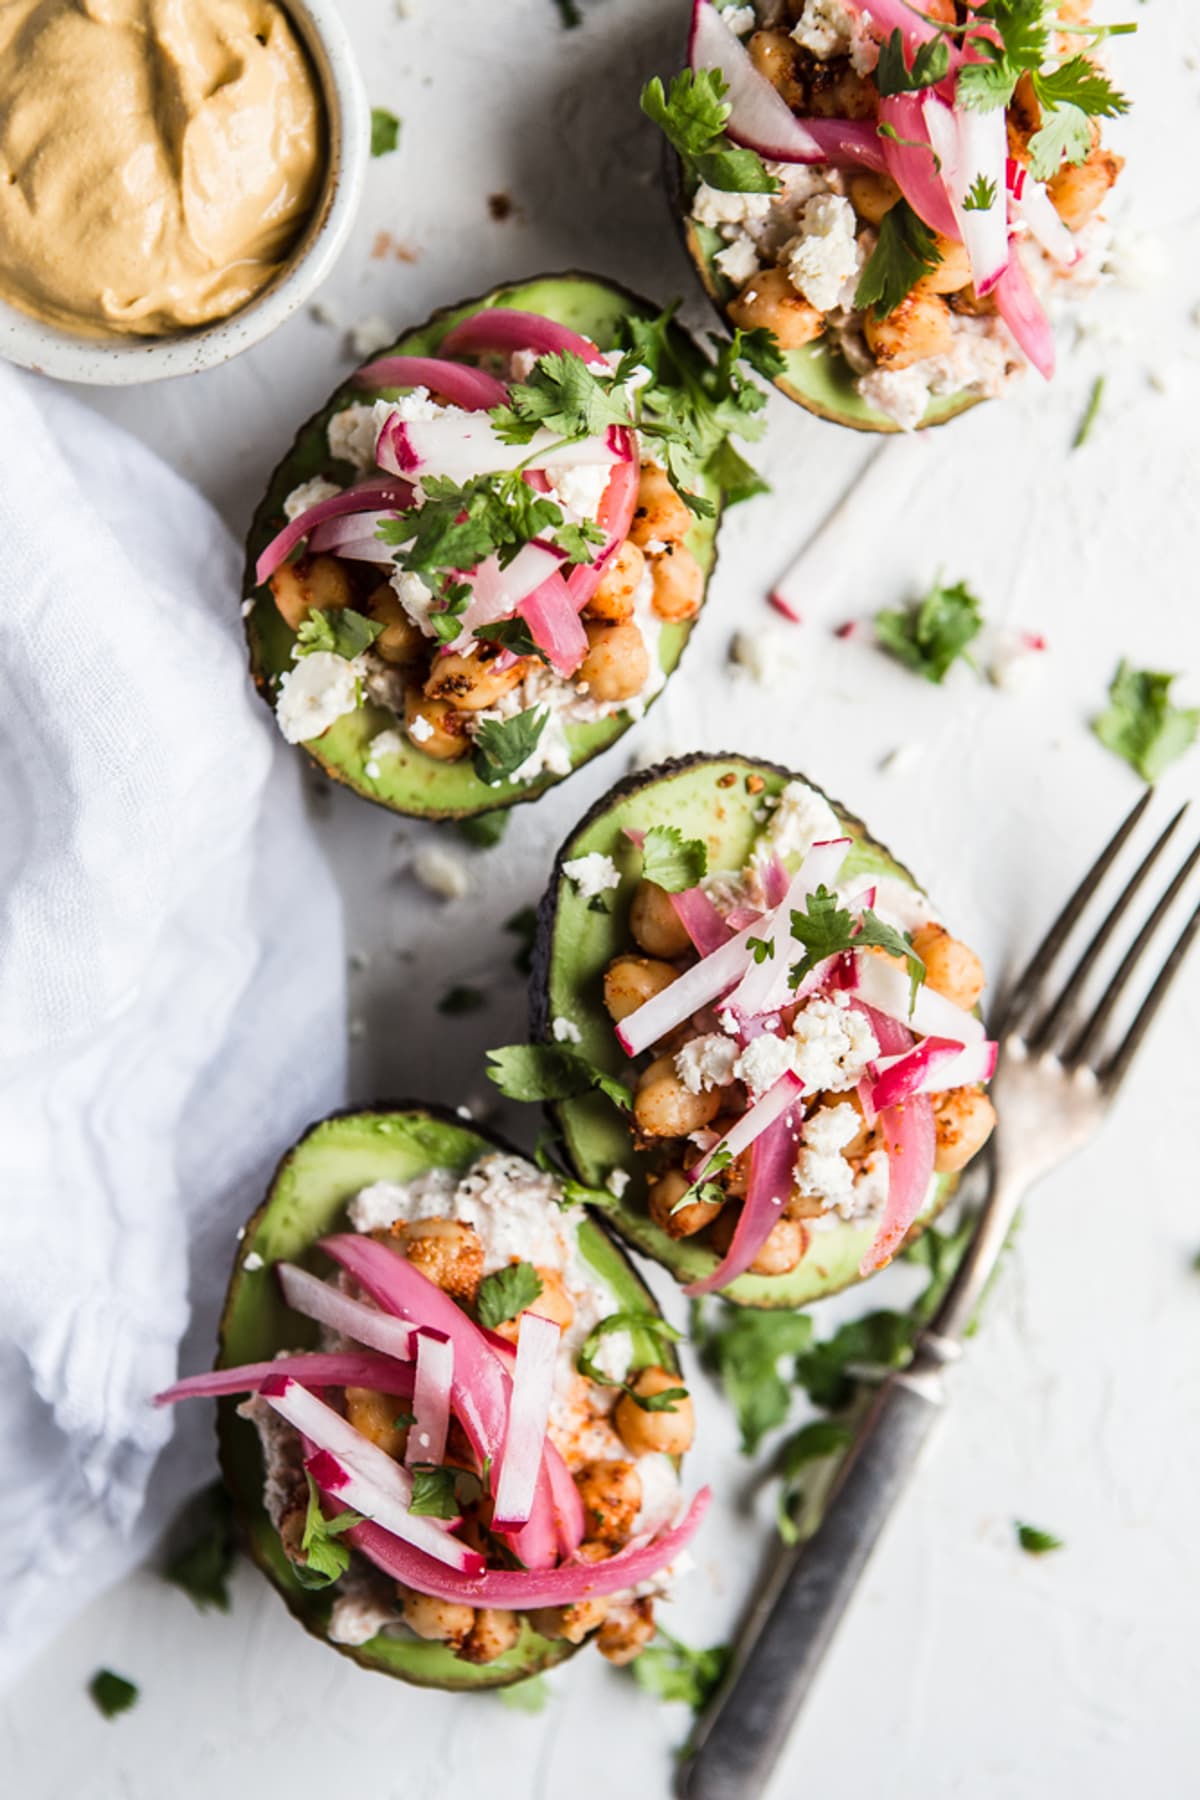 Tuna Salad And Chickpea Stuffed Avocado with pickled onions